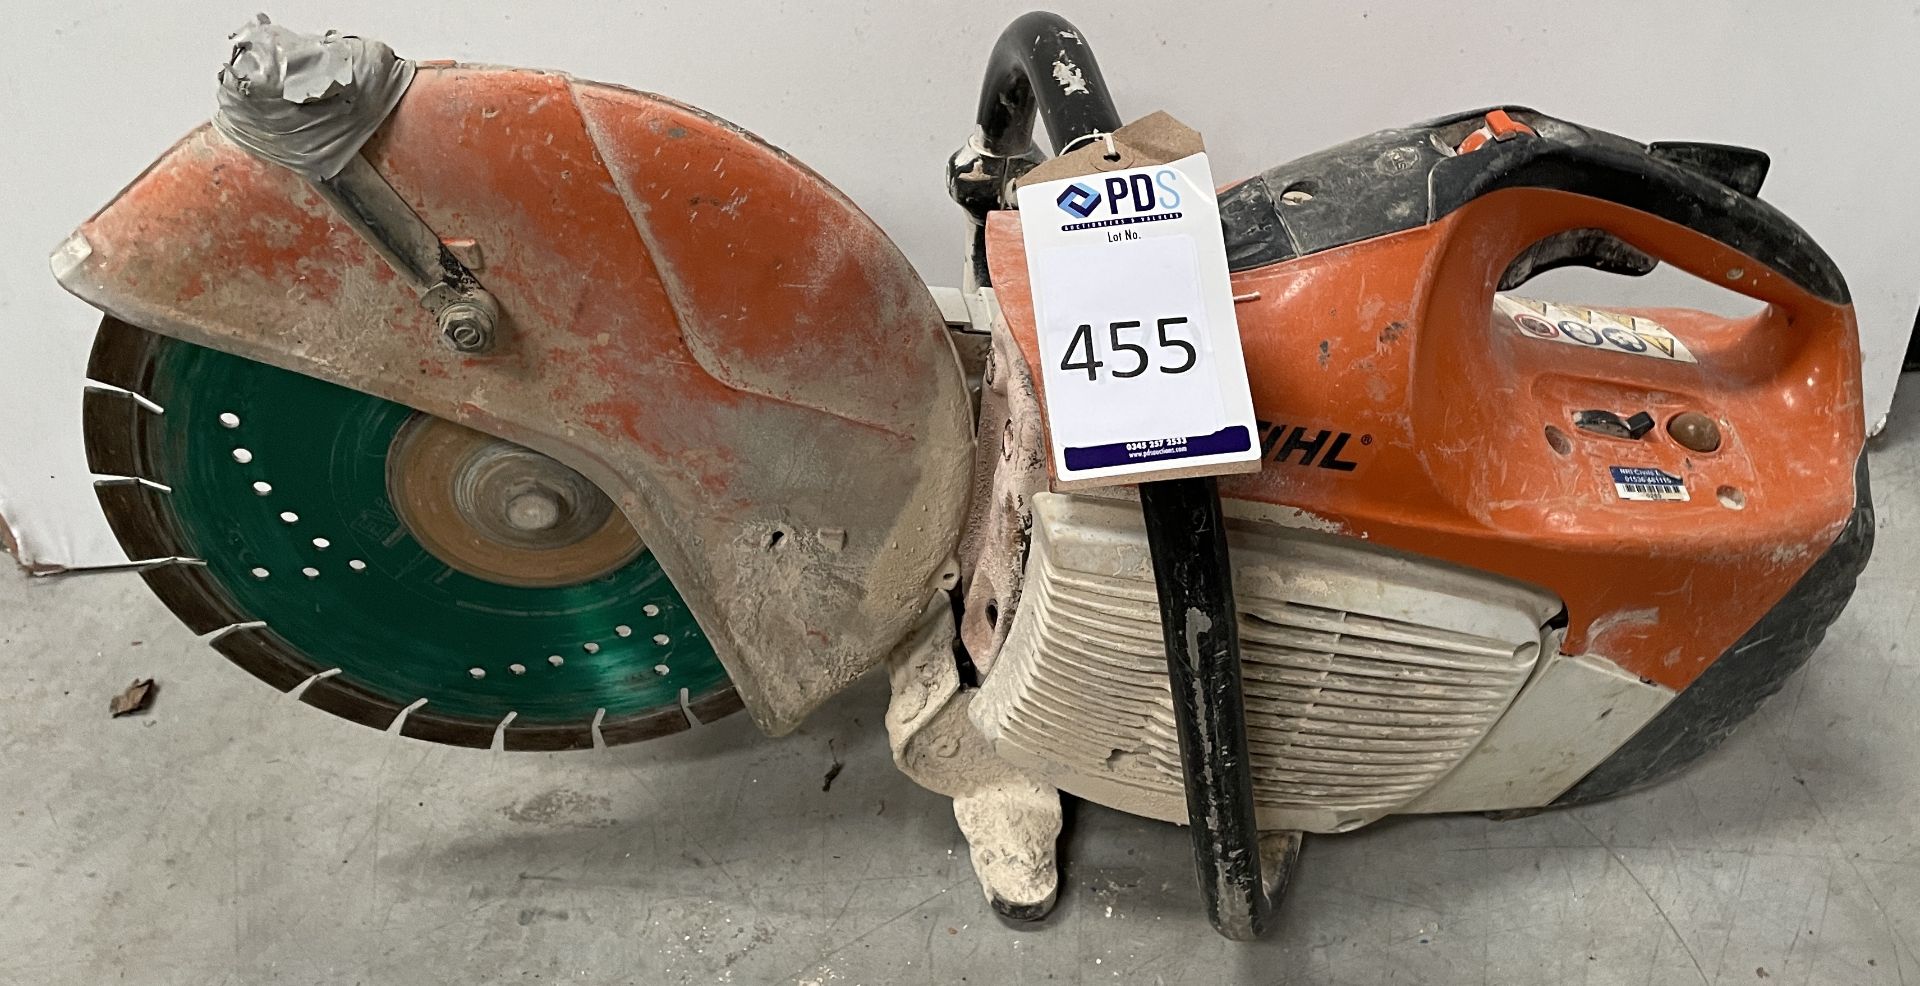 Stihl Ts410 Petrol Cut Off Saw (Location: Brentwood. Please Refer to General Notes)